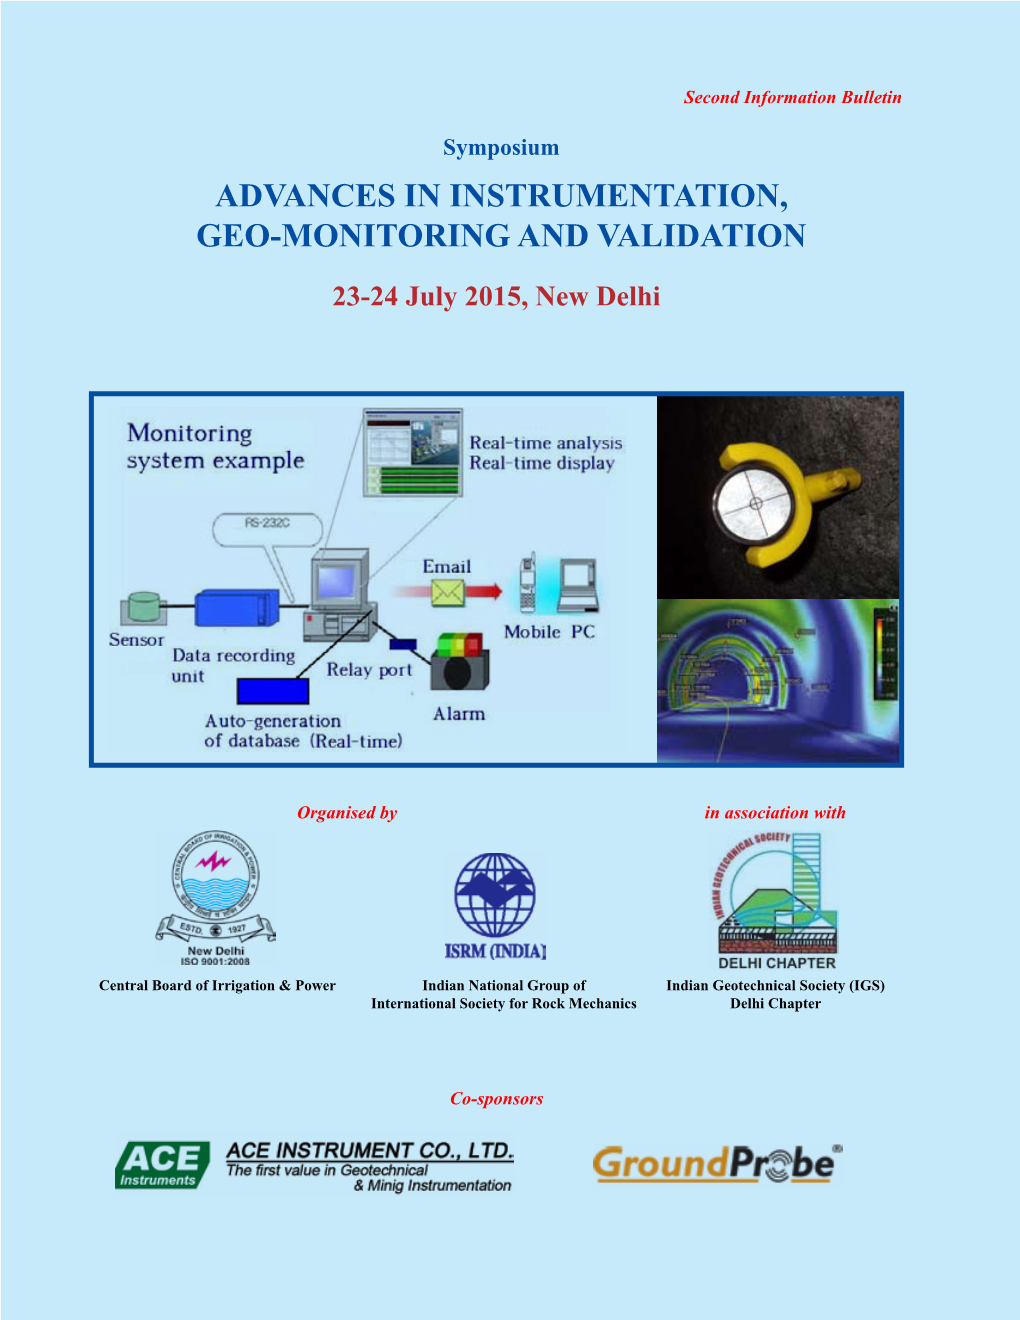 Advances in Instrumentation, Geo-Monitoring and Validation